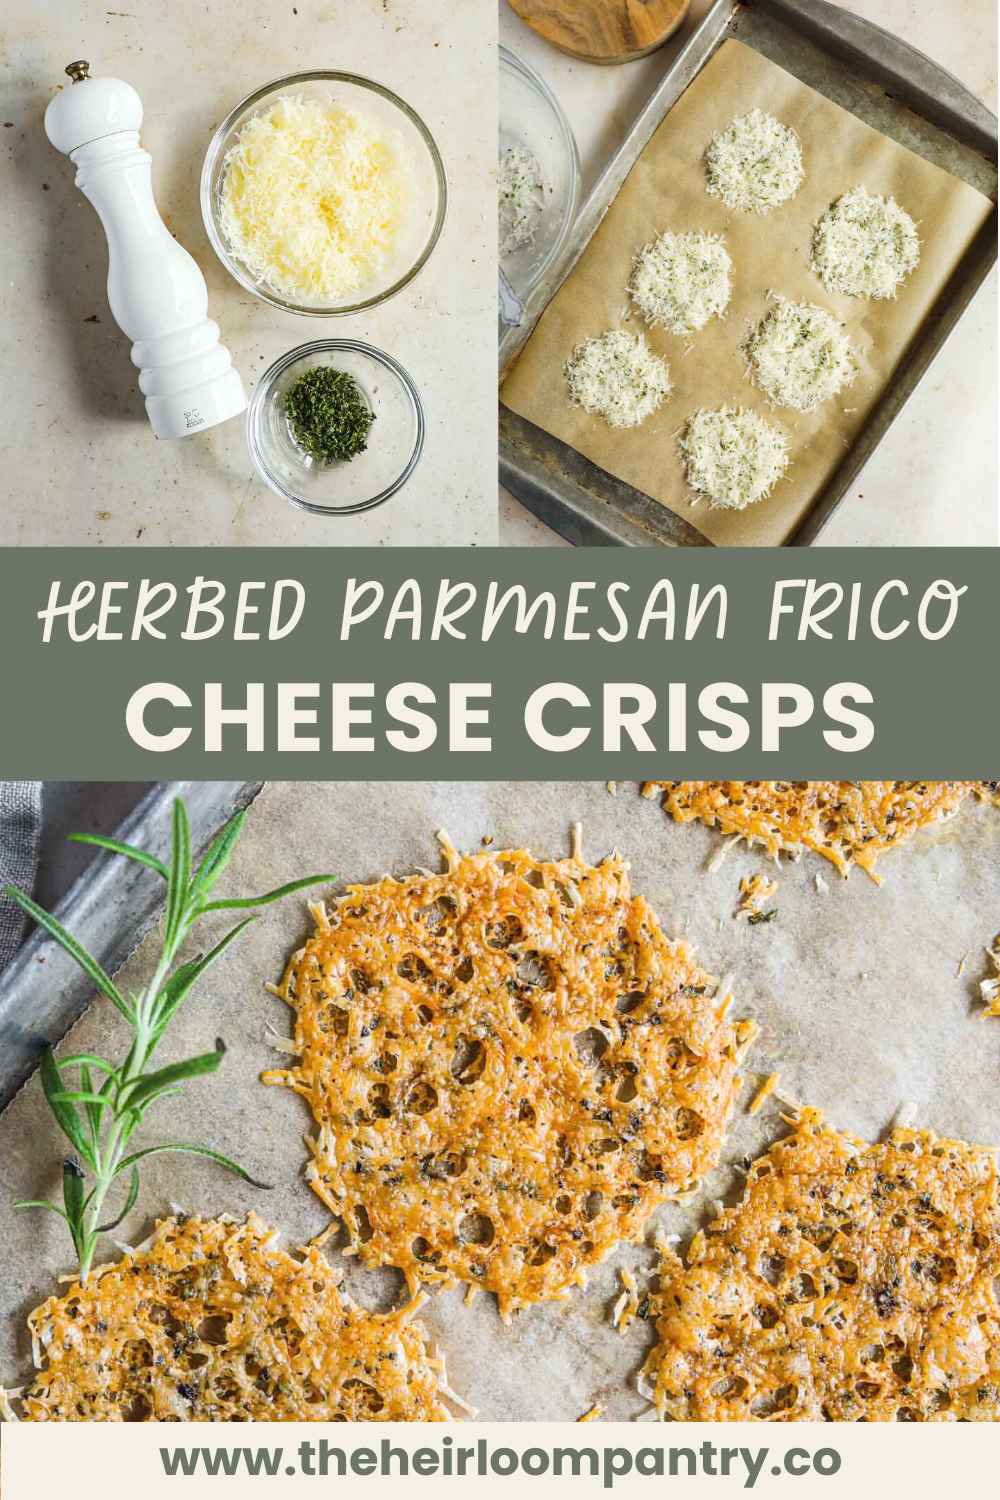 Herbed Montasio and Parmesan Frico Cheese Crisps Pinterest pin.